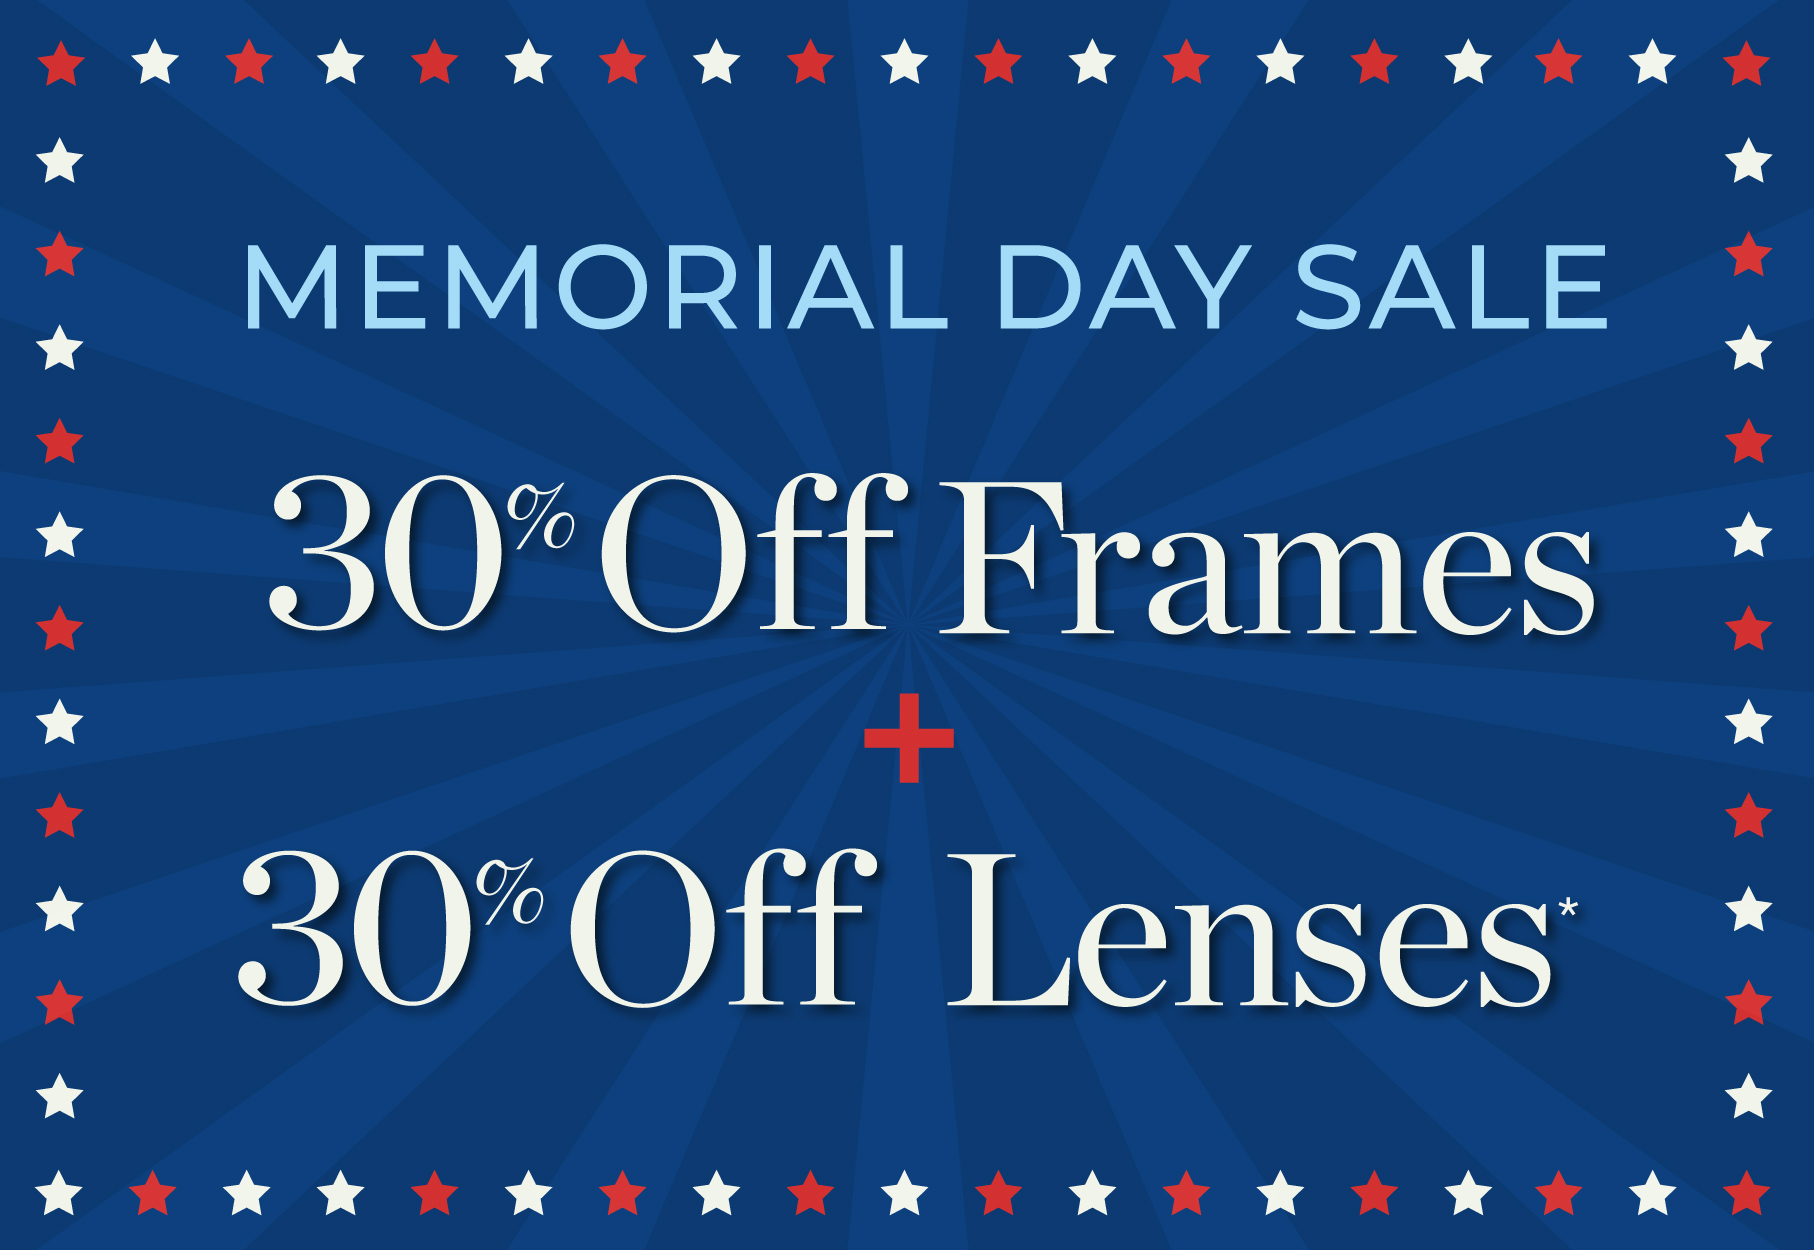 Text: 30% off Frames + 30% off Lenses* Photo: Blue stripped background with red and white stars surrounding the text.